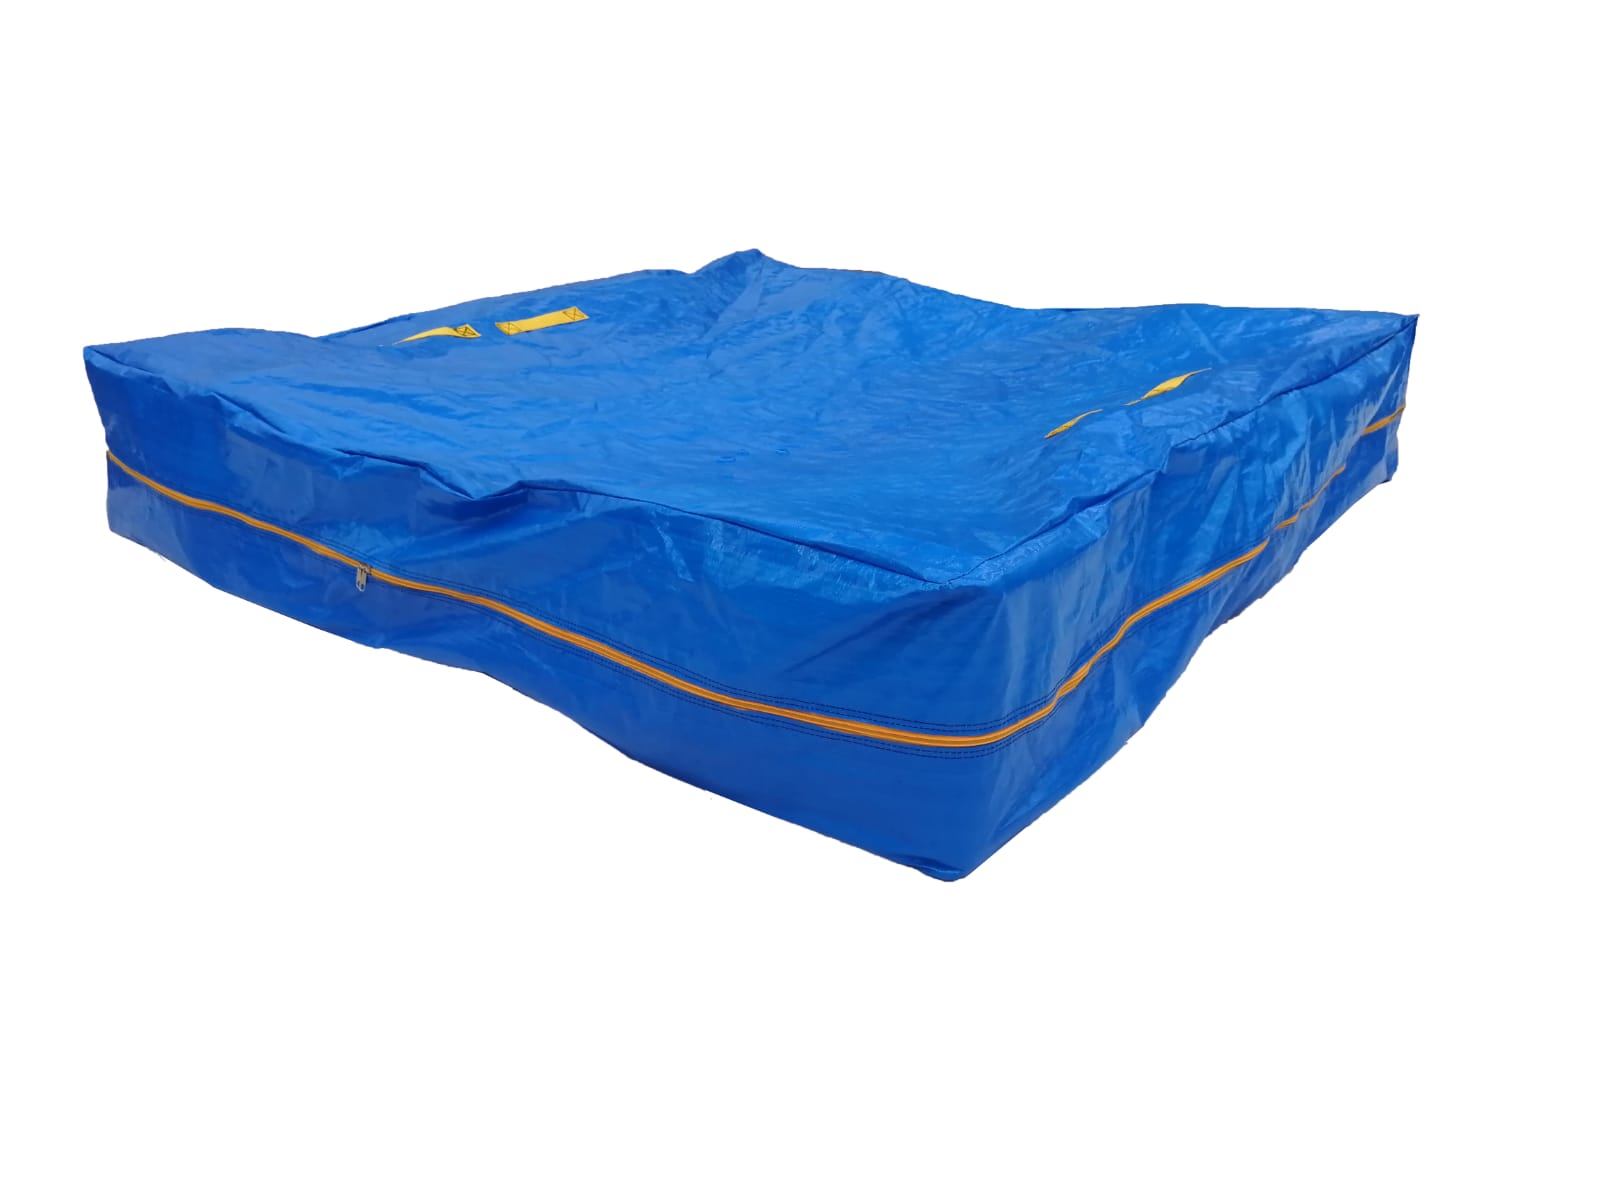 mattress bag for moving heavy duty cover protector